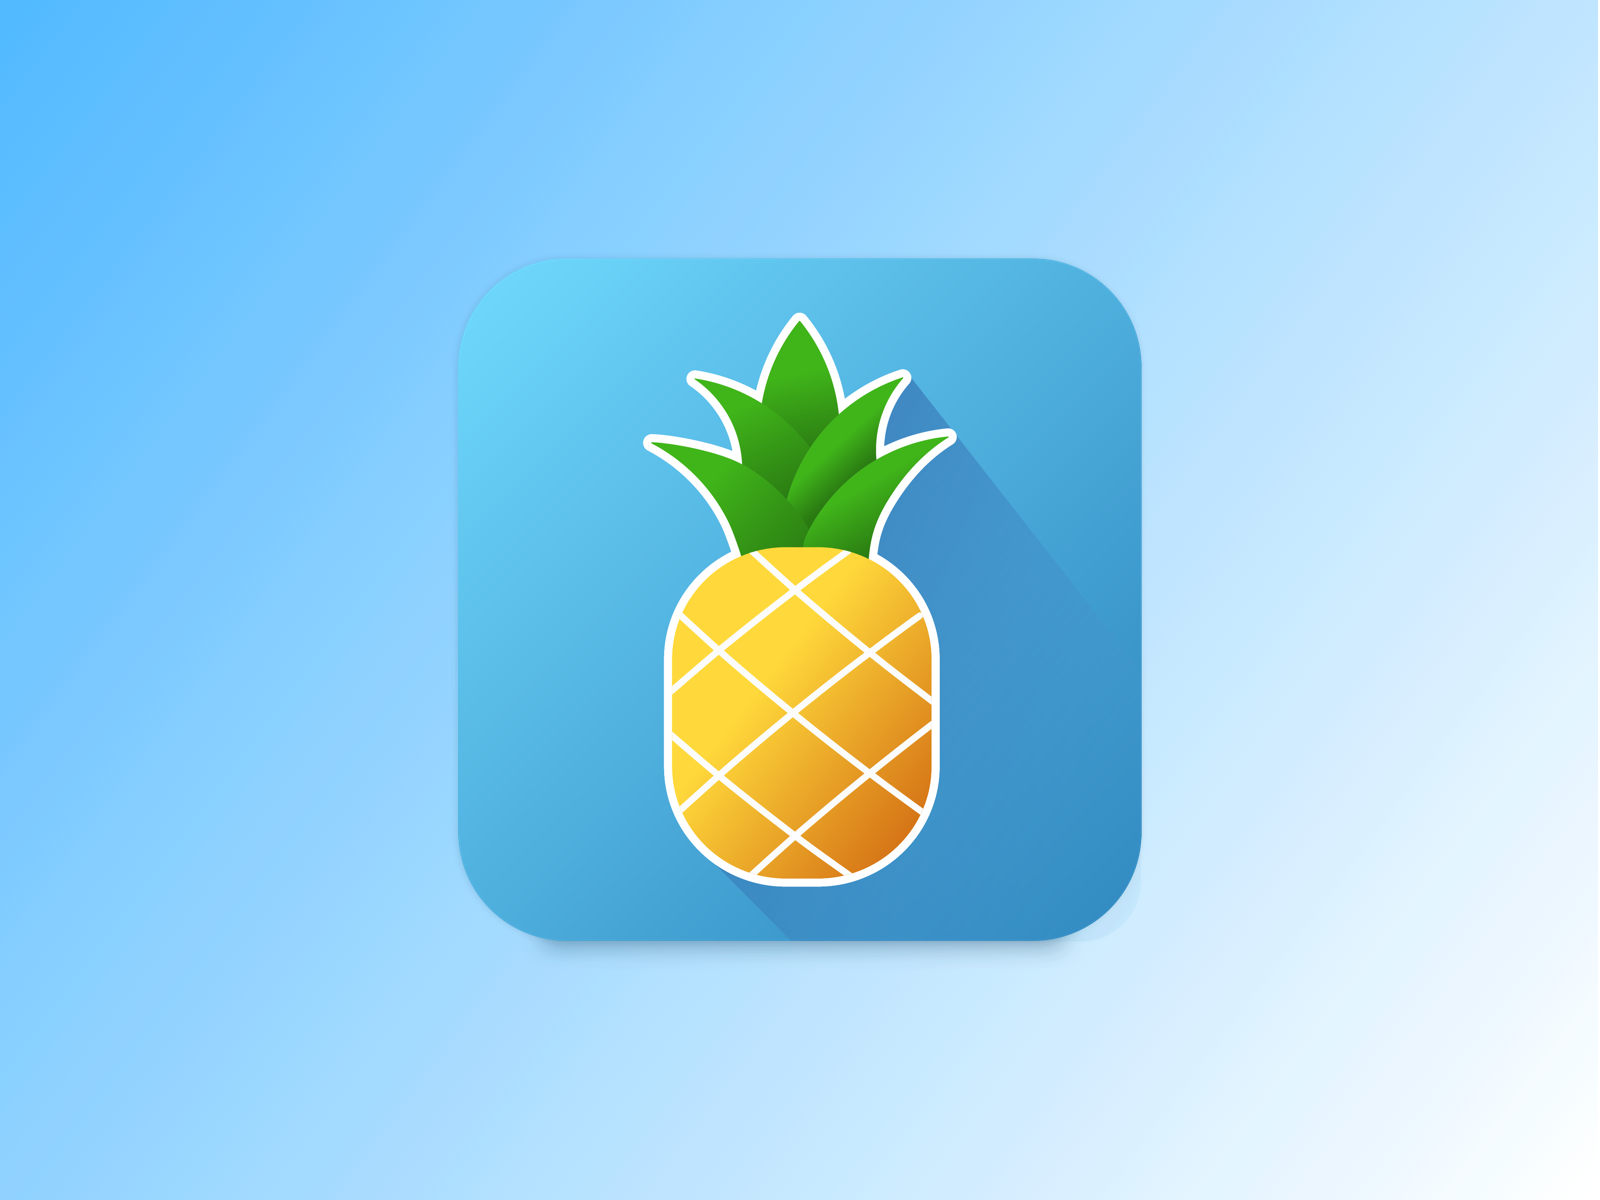 Daily Ui 005 App Icon By Alen Huang On Dribbble